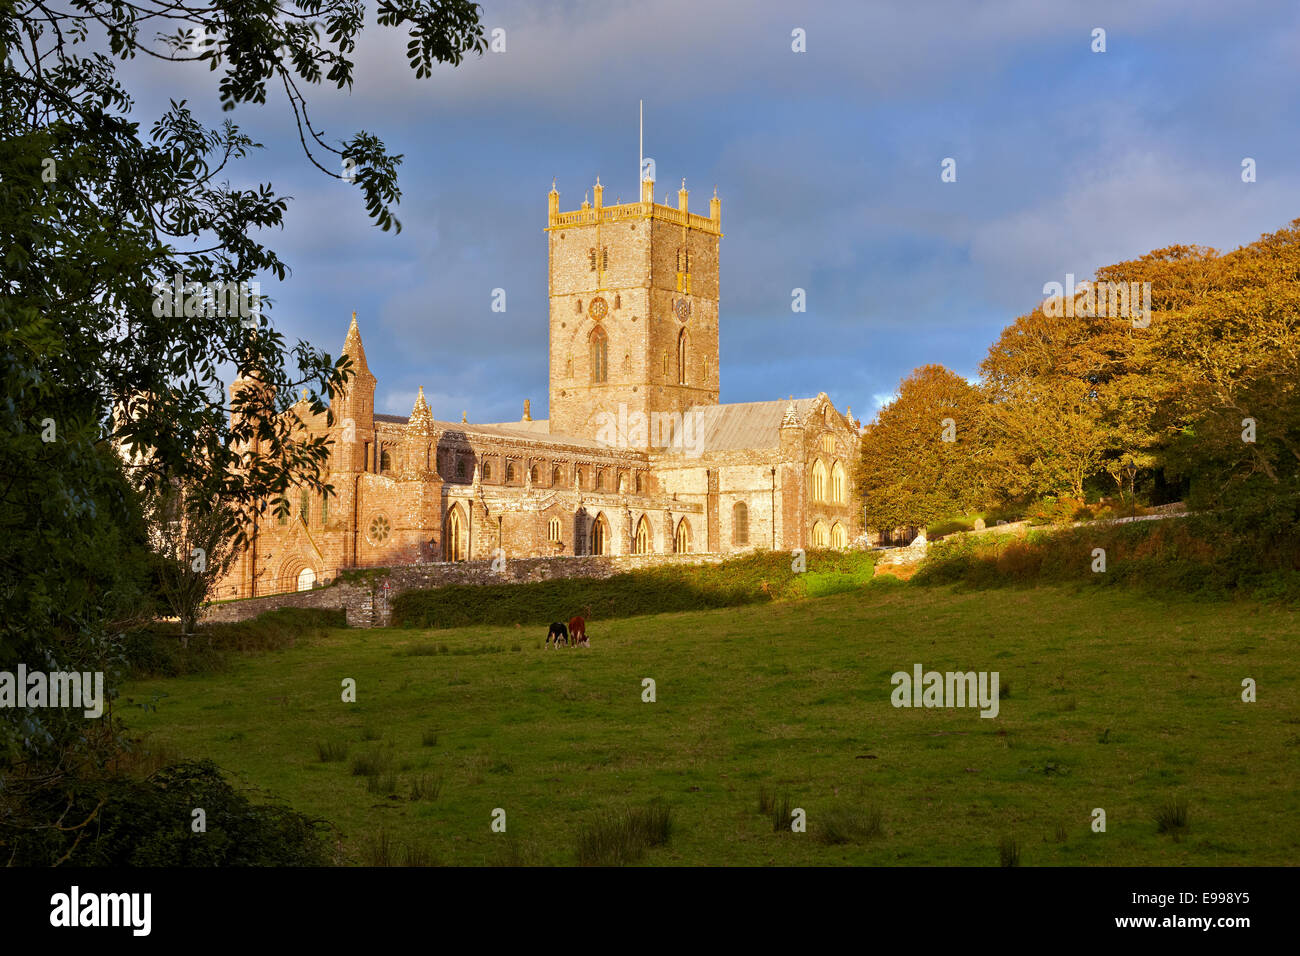 St David's Cathedral in the evening sunshine, Pembrokeshire Wales UK Stock Photo